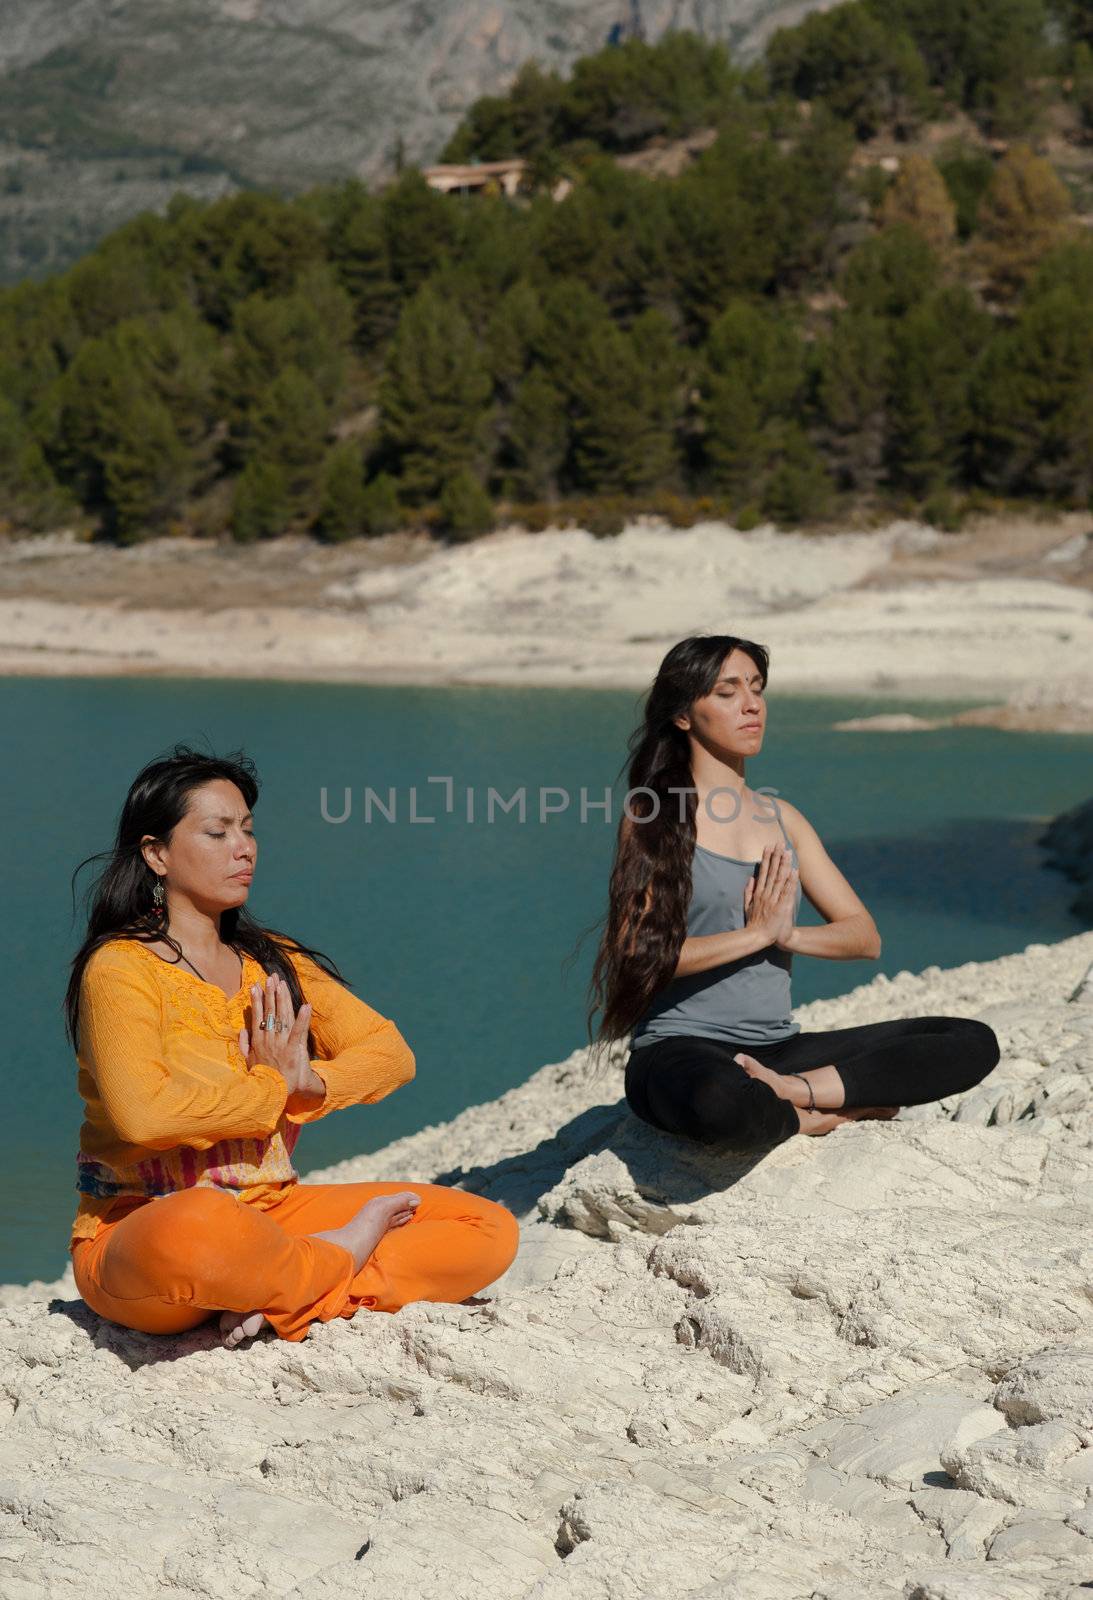 MOther and daughter, yoga at beautiful lakeside setting